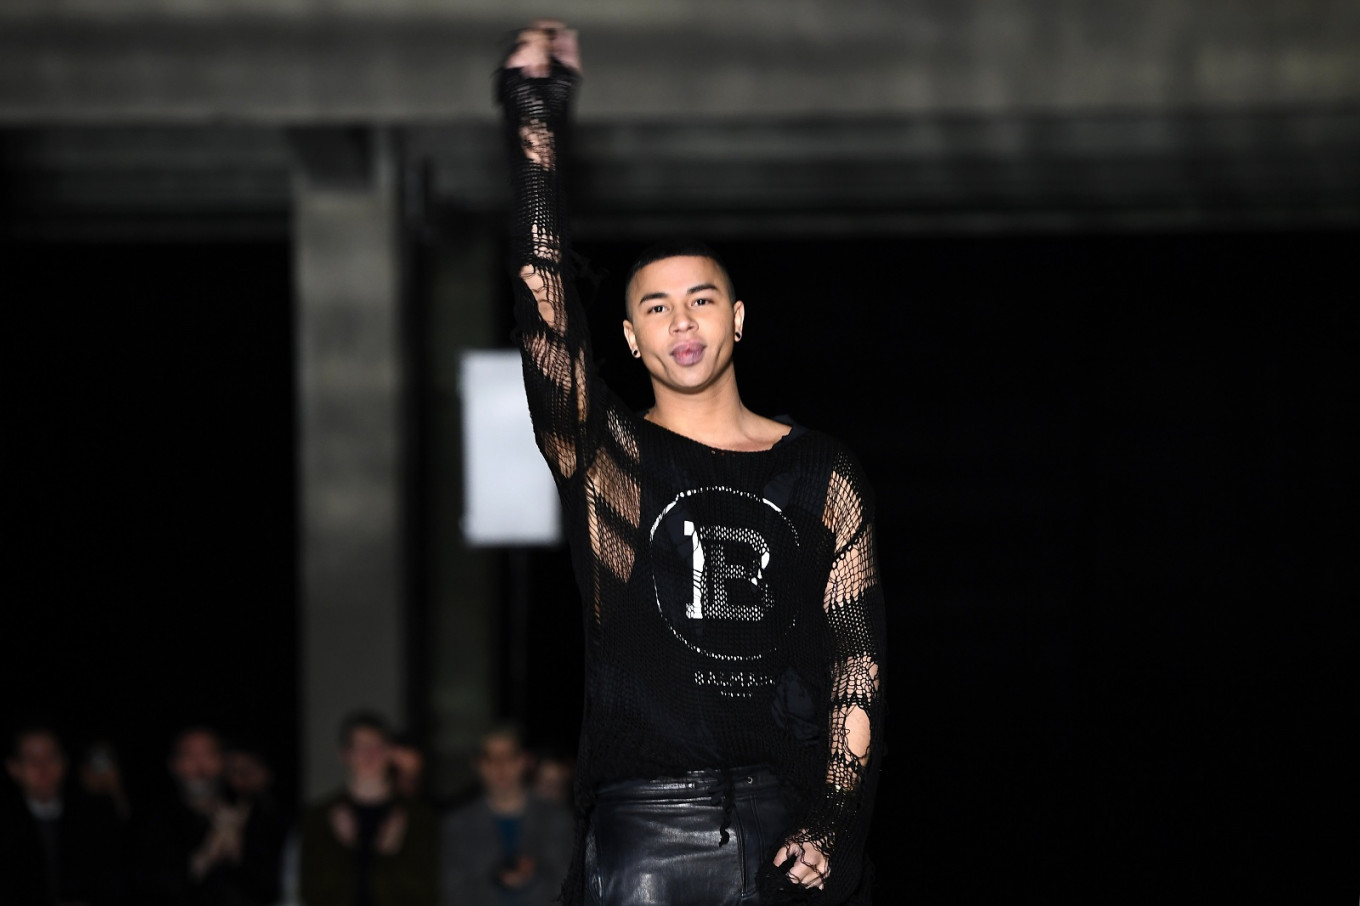 Rykke accent Illusion Balmain's Olivier Rousteing opens personal account for fans to shop  Instagram feed - Lifestyle - The Jakarta Post